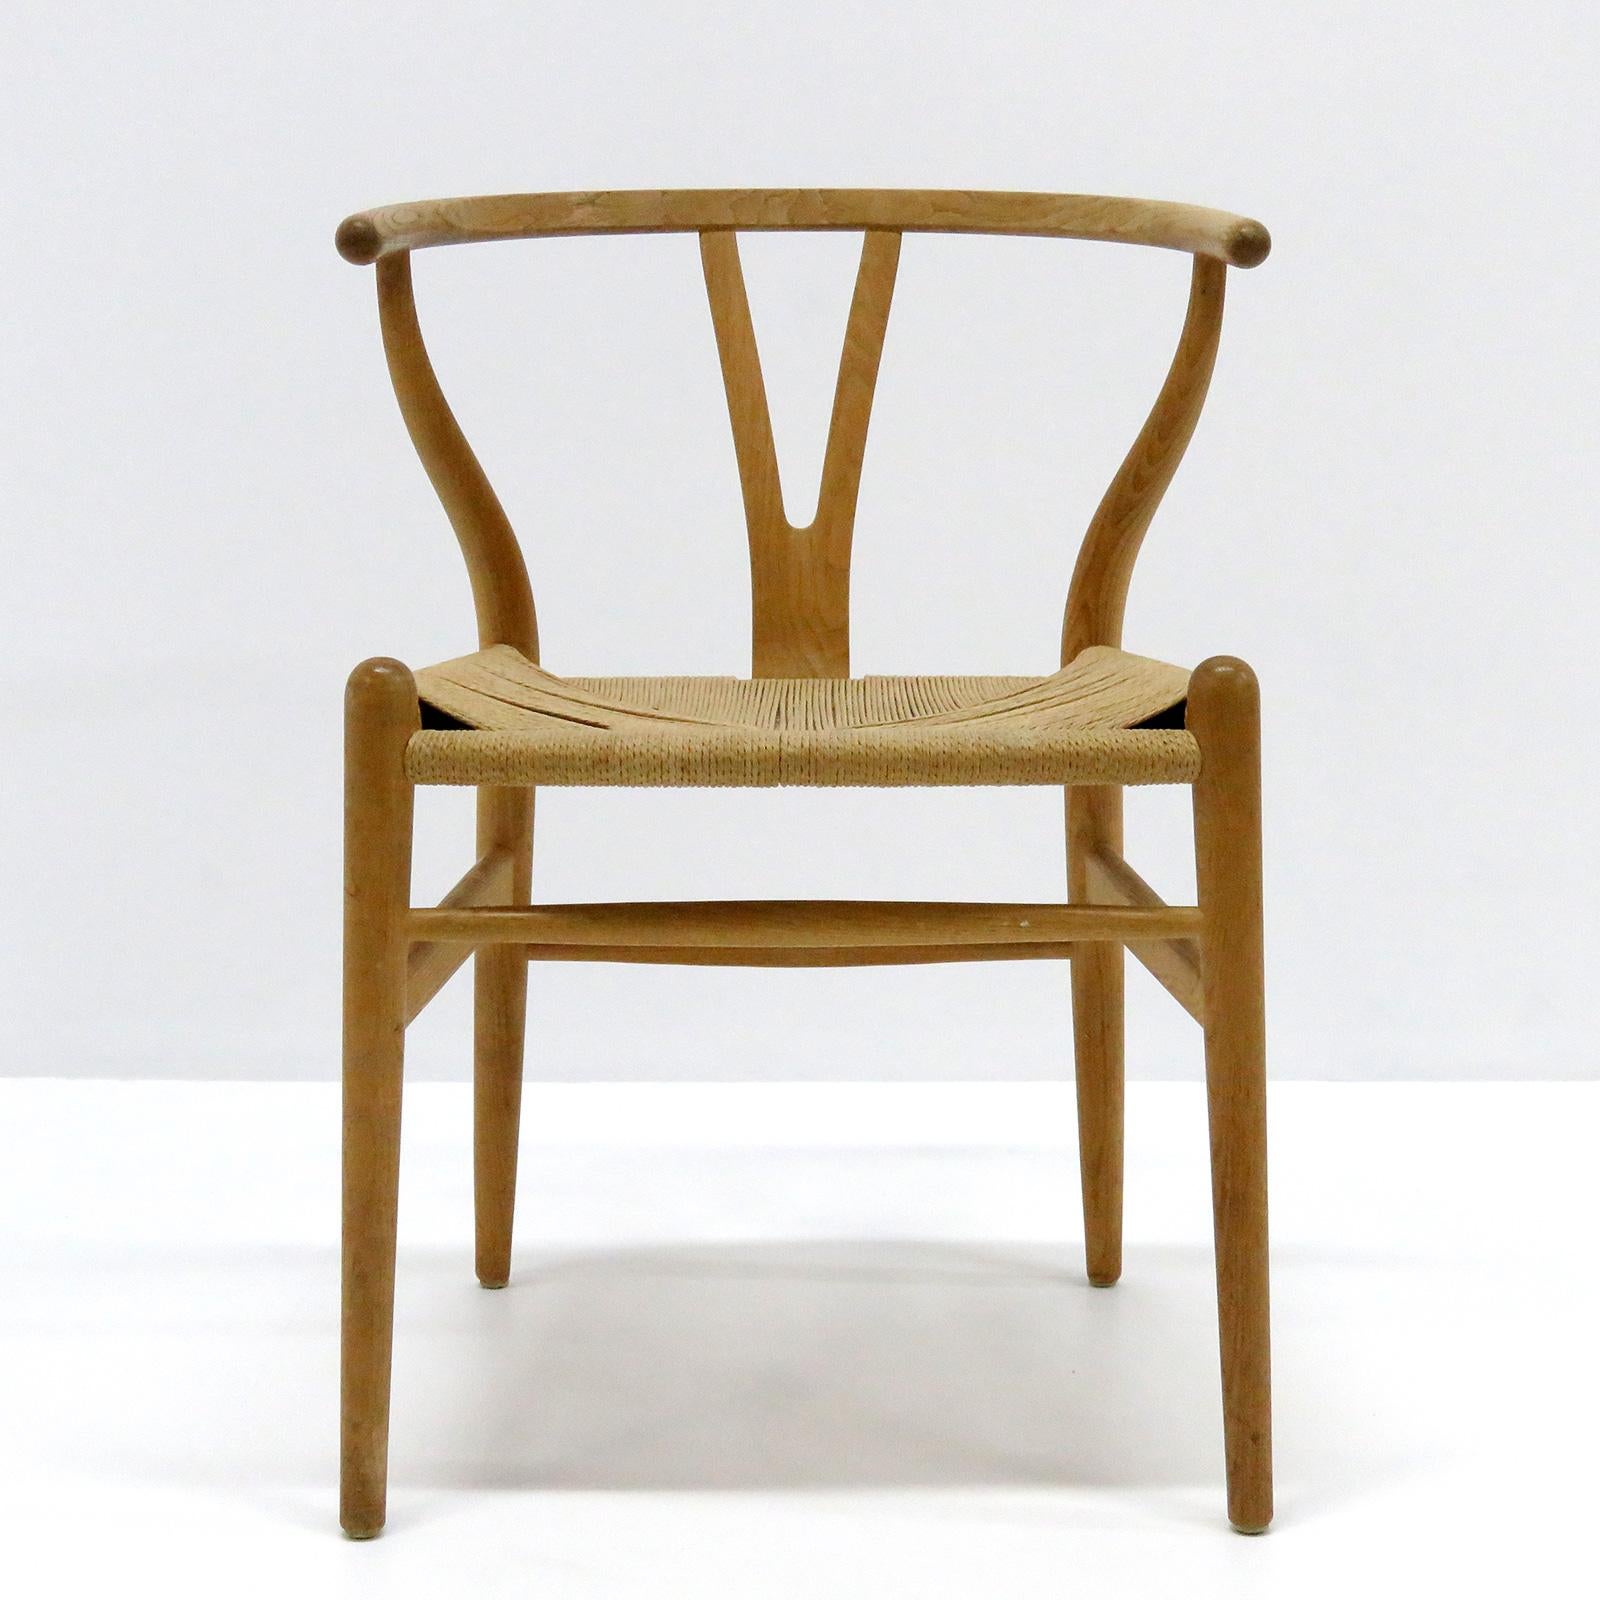 Wonderful model CH-24 dining chairs by Hans Wegner for Carl Hansen & Søn, designed in 1950, in light oak with woven paper cord seat, four seat cushions with significant wear and stains are available on request, marked.